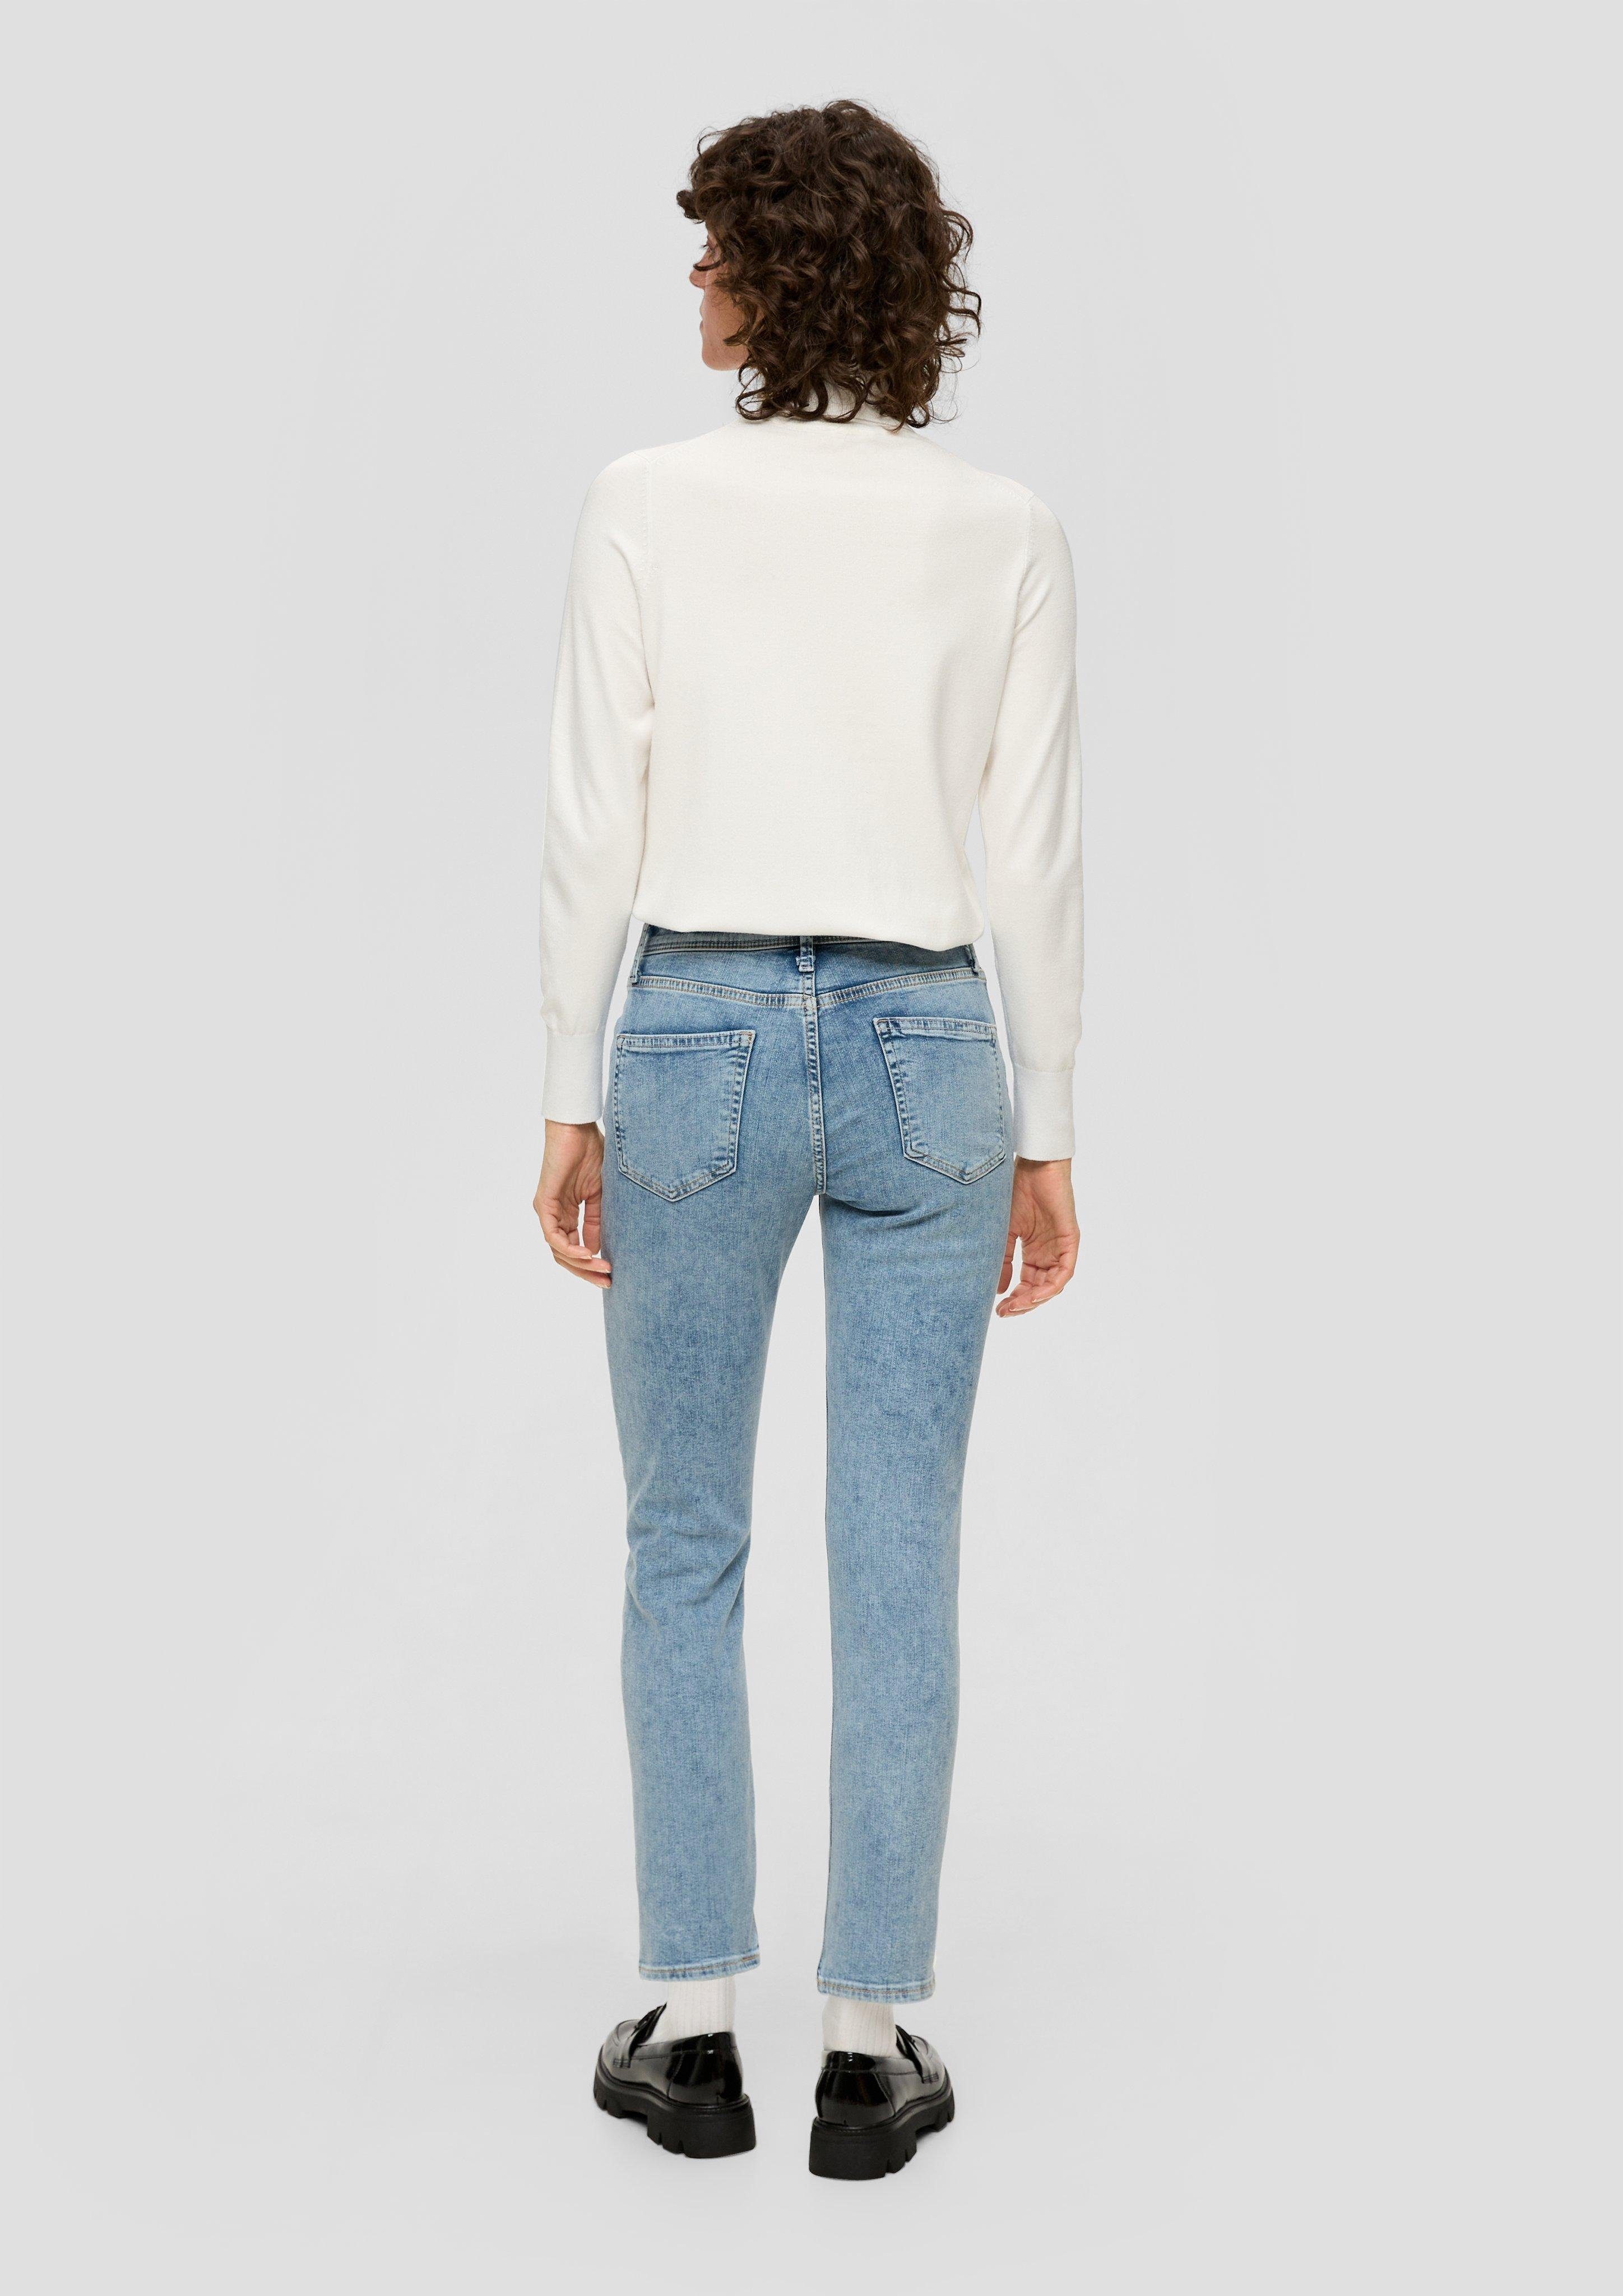 s.Oliver 7/8-Jeans Ankle Jeans / Teilungsnähte Fit Waschung, Slim Mid / Rise Slim Leg / Label-Patch